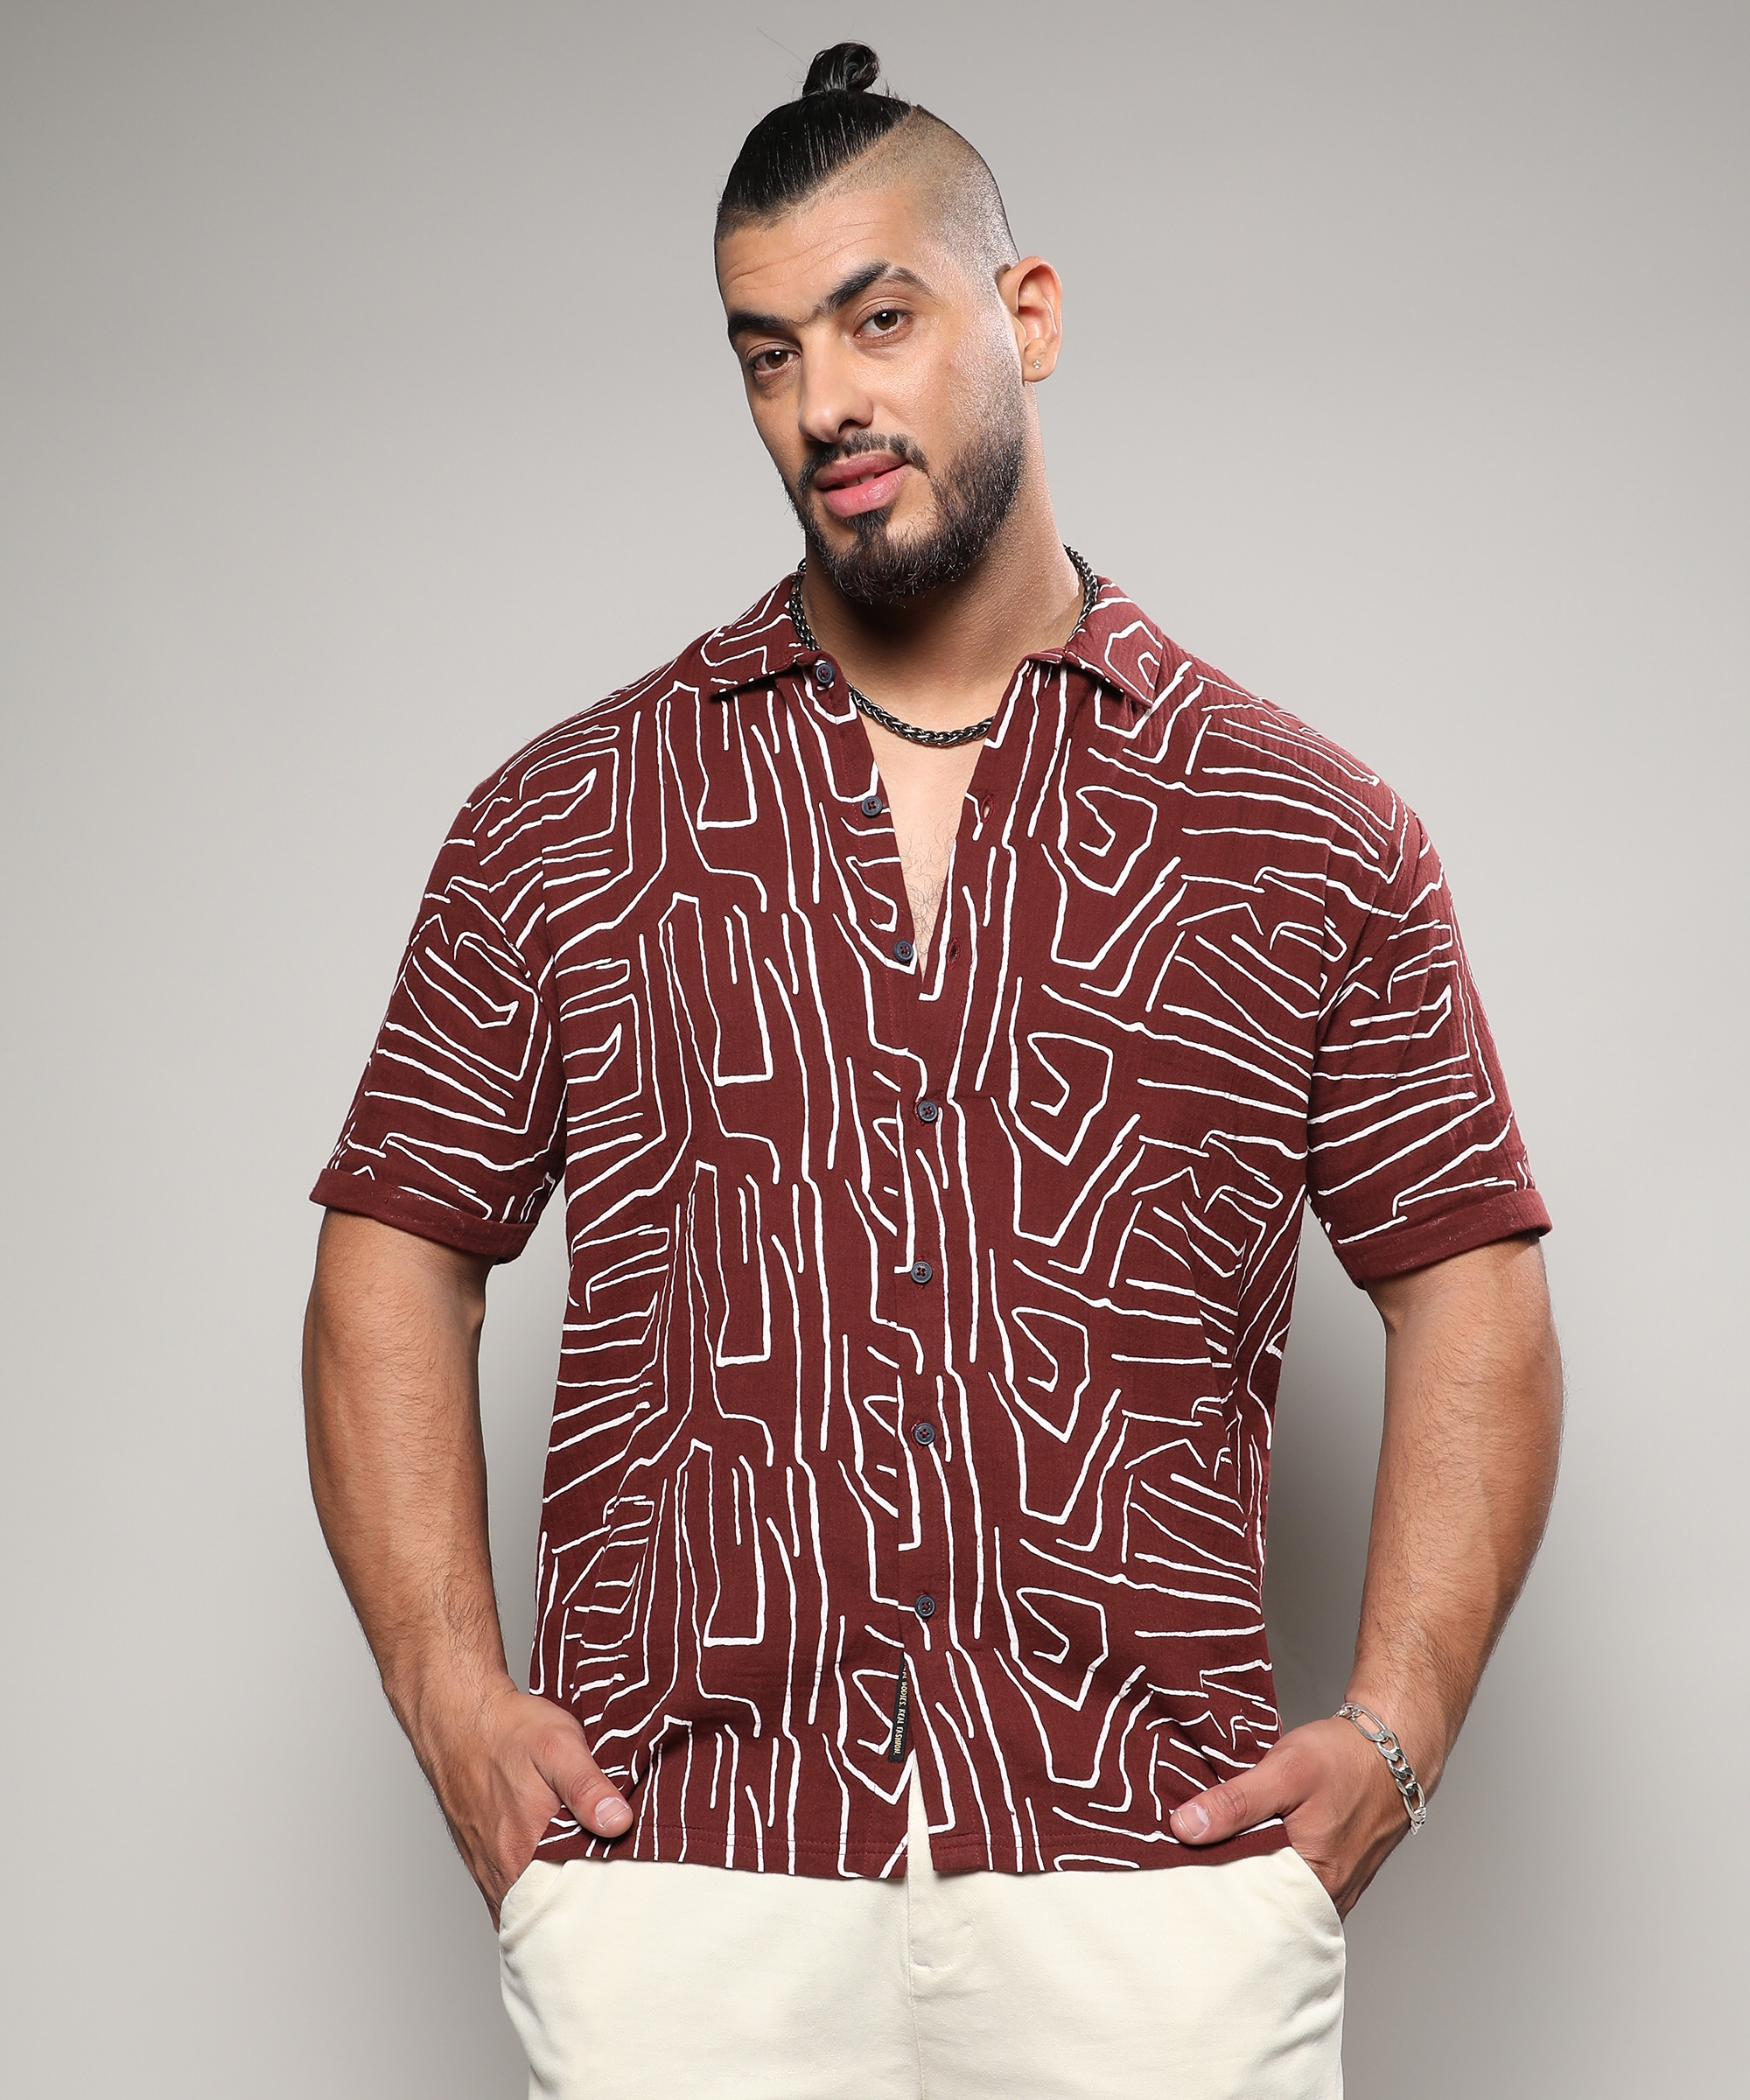 Men's Maroon Red Abstract Lines Print Shirt